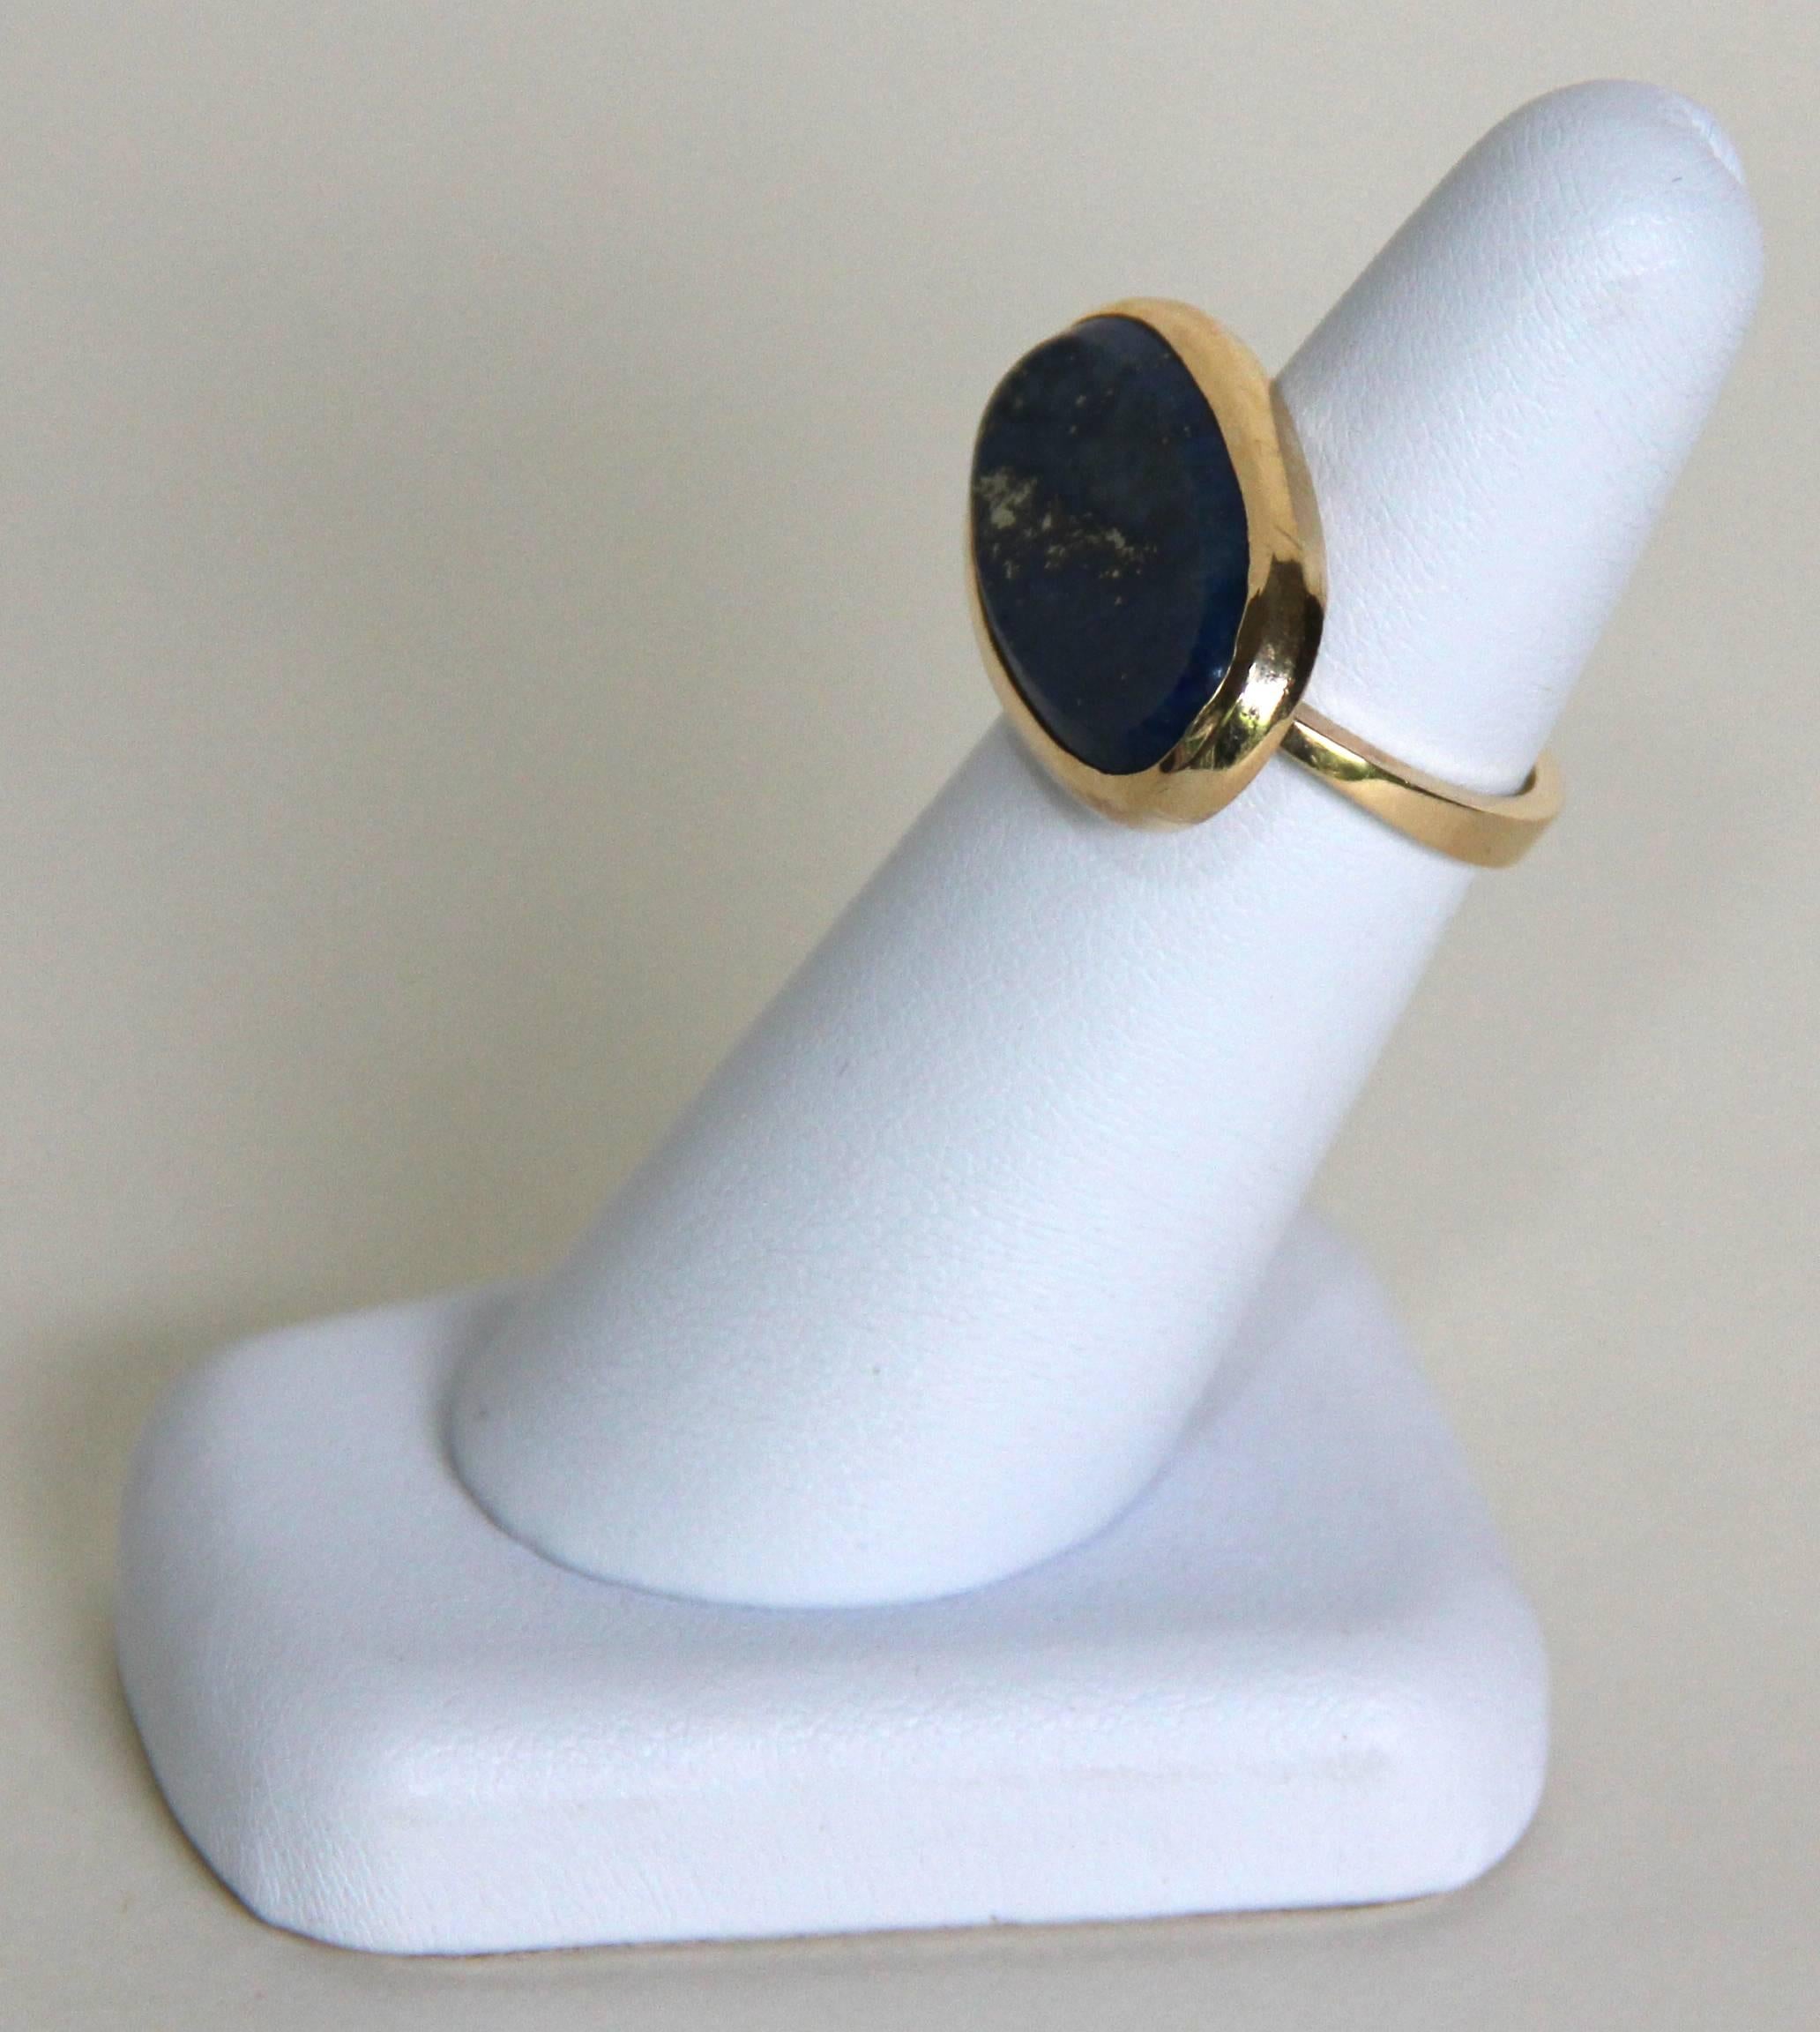 This original and stylish ring evokes the timelessness of antiquity. A large and smooth Lapis Lazuli oval stone is embedded in a 14K Yellow Gold ring. The ring is sized 7. The Lapis Lazuli oval stone measures 25mm long and 12mm wide. Made by Marina